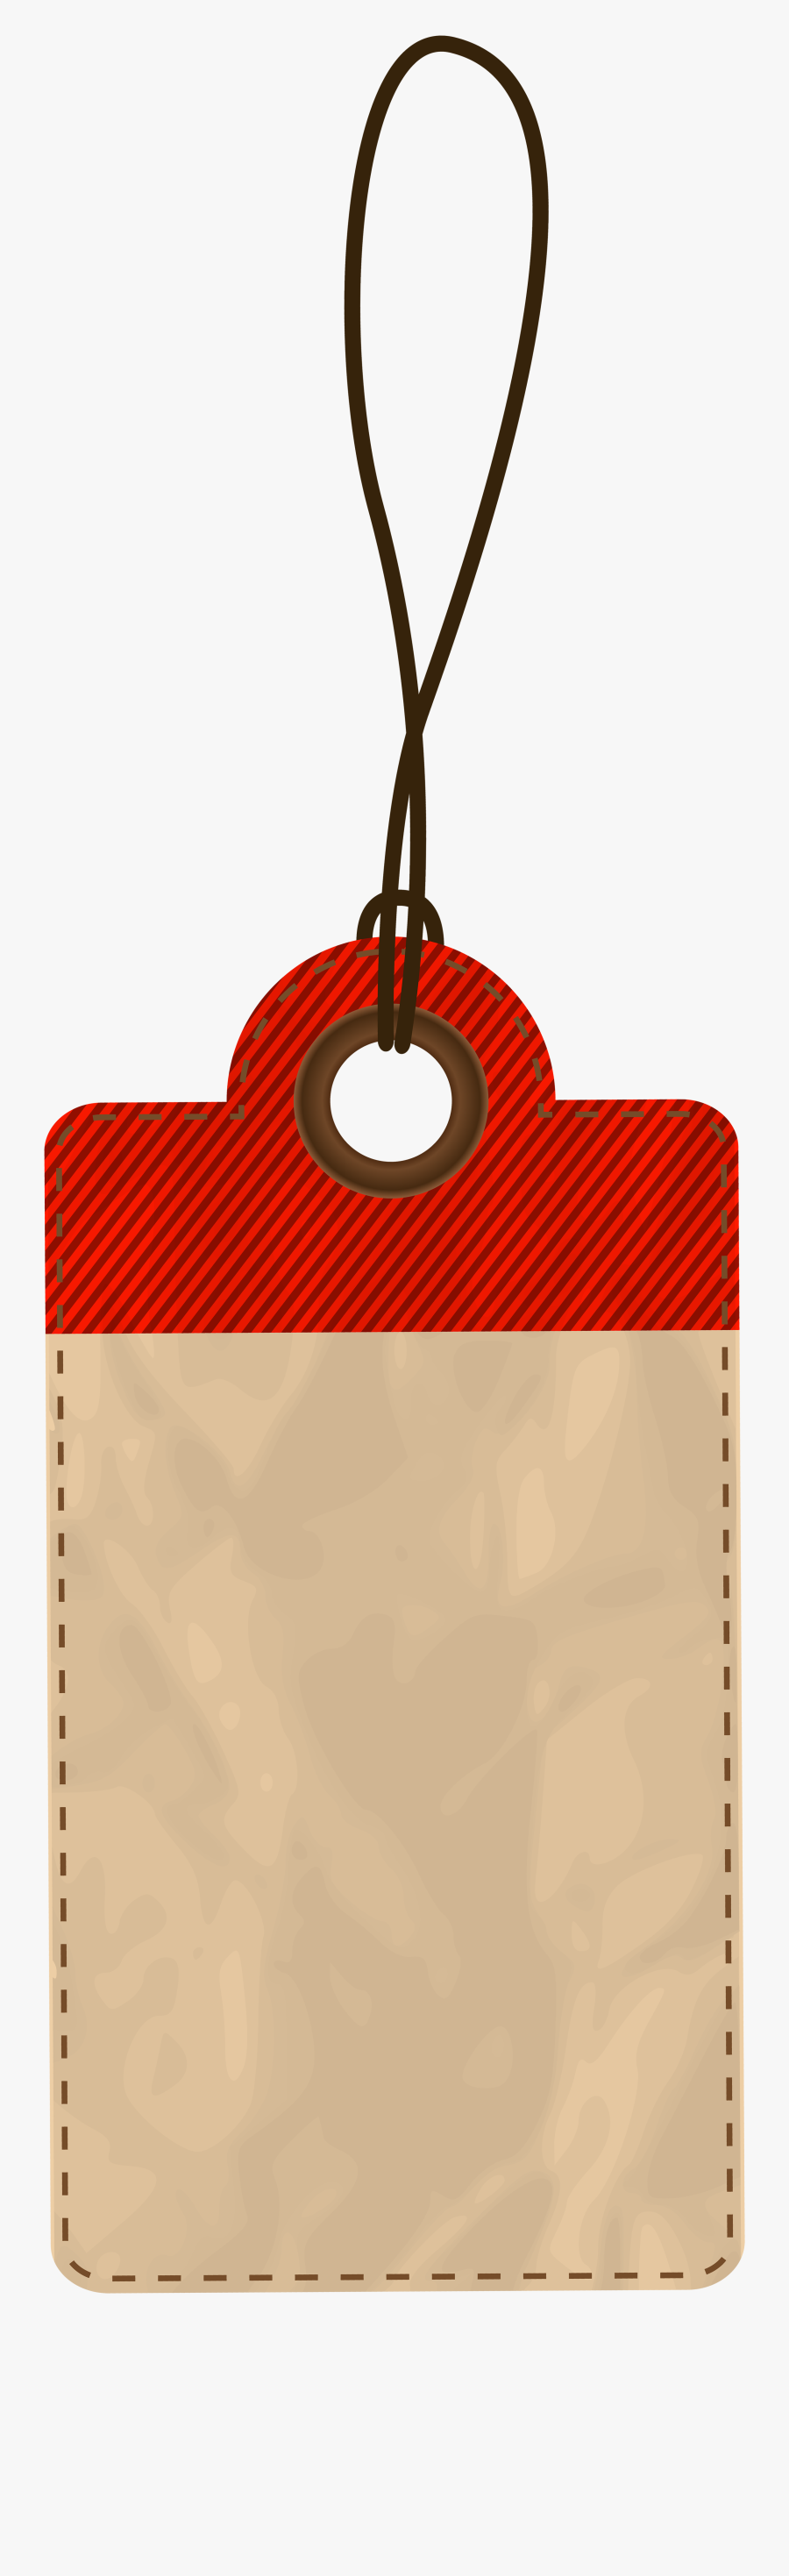 Empty Price Tag Red Png Clip Art - Empty Tag Transparent, Transparent Clipart